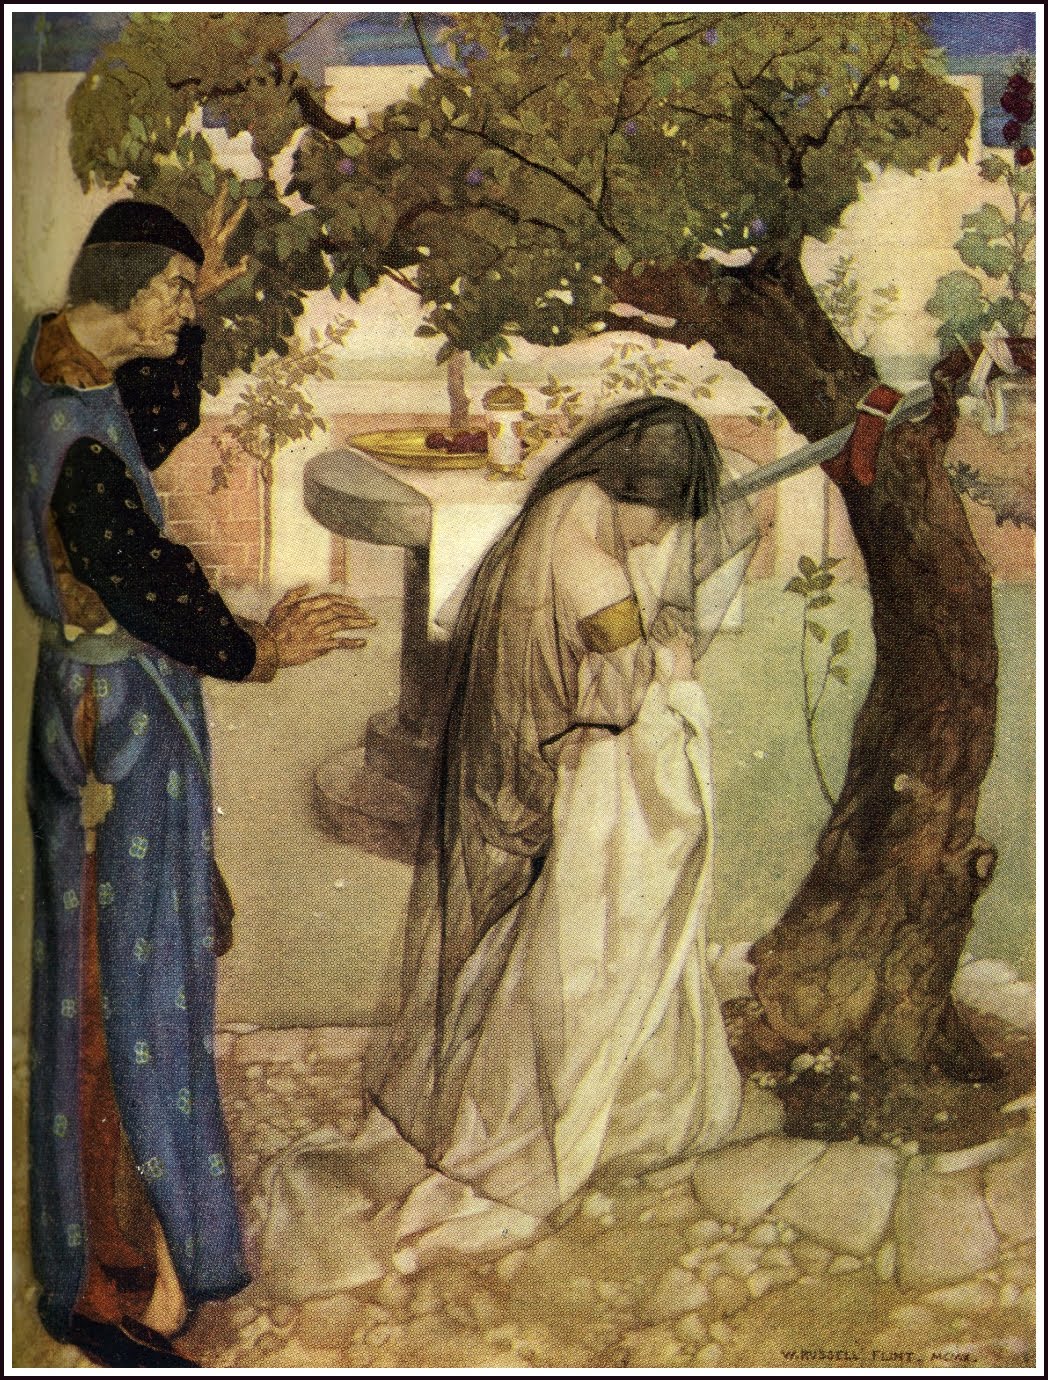 painting of a woman in a veil kneeling before a tree